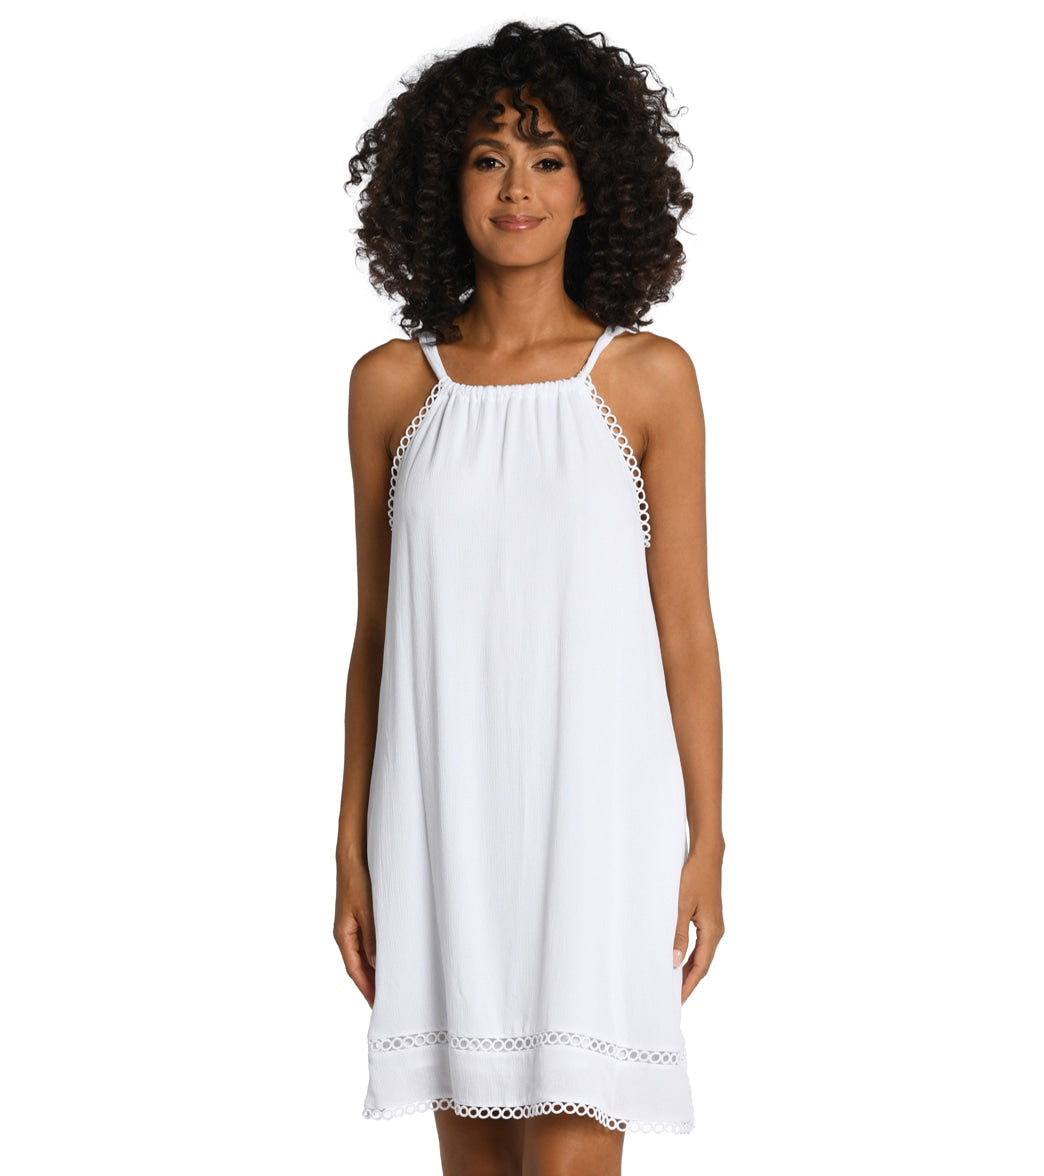 La Blanca Womens Illusion Covers High Neck Cover Up Dress